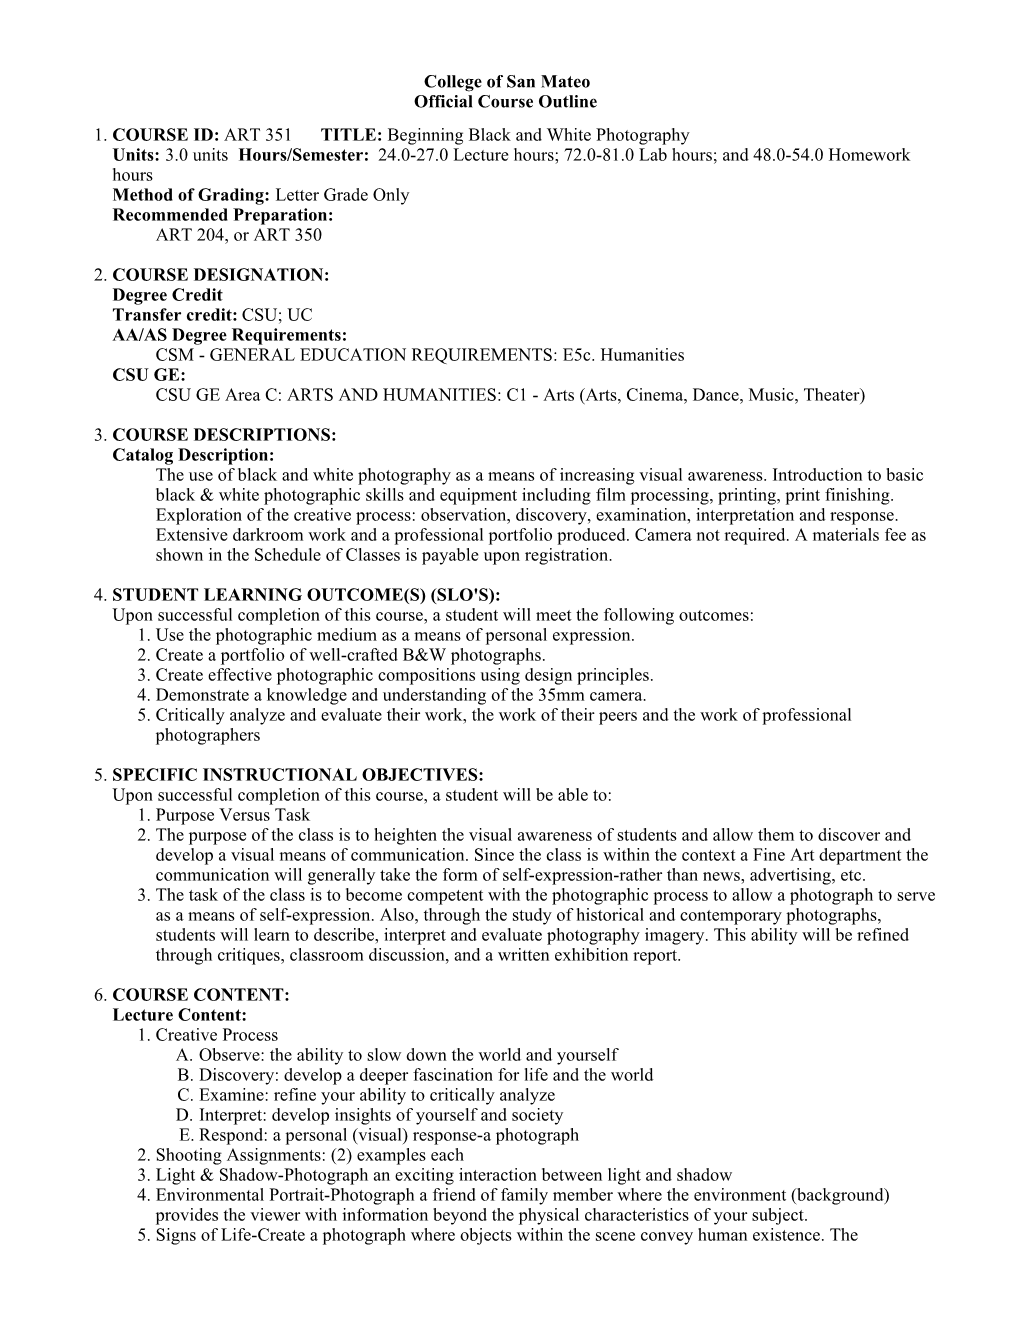 College of San Mateo Official Course Outline COURSE ID: ART 351 TITLE: Beginning Black and White Photography Units